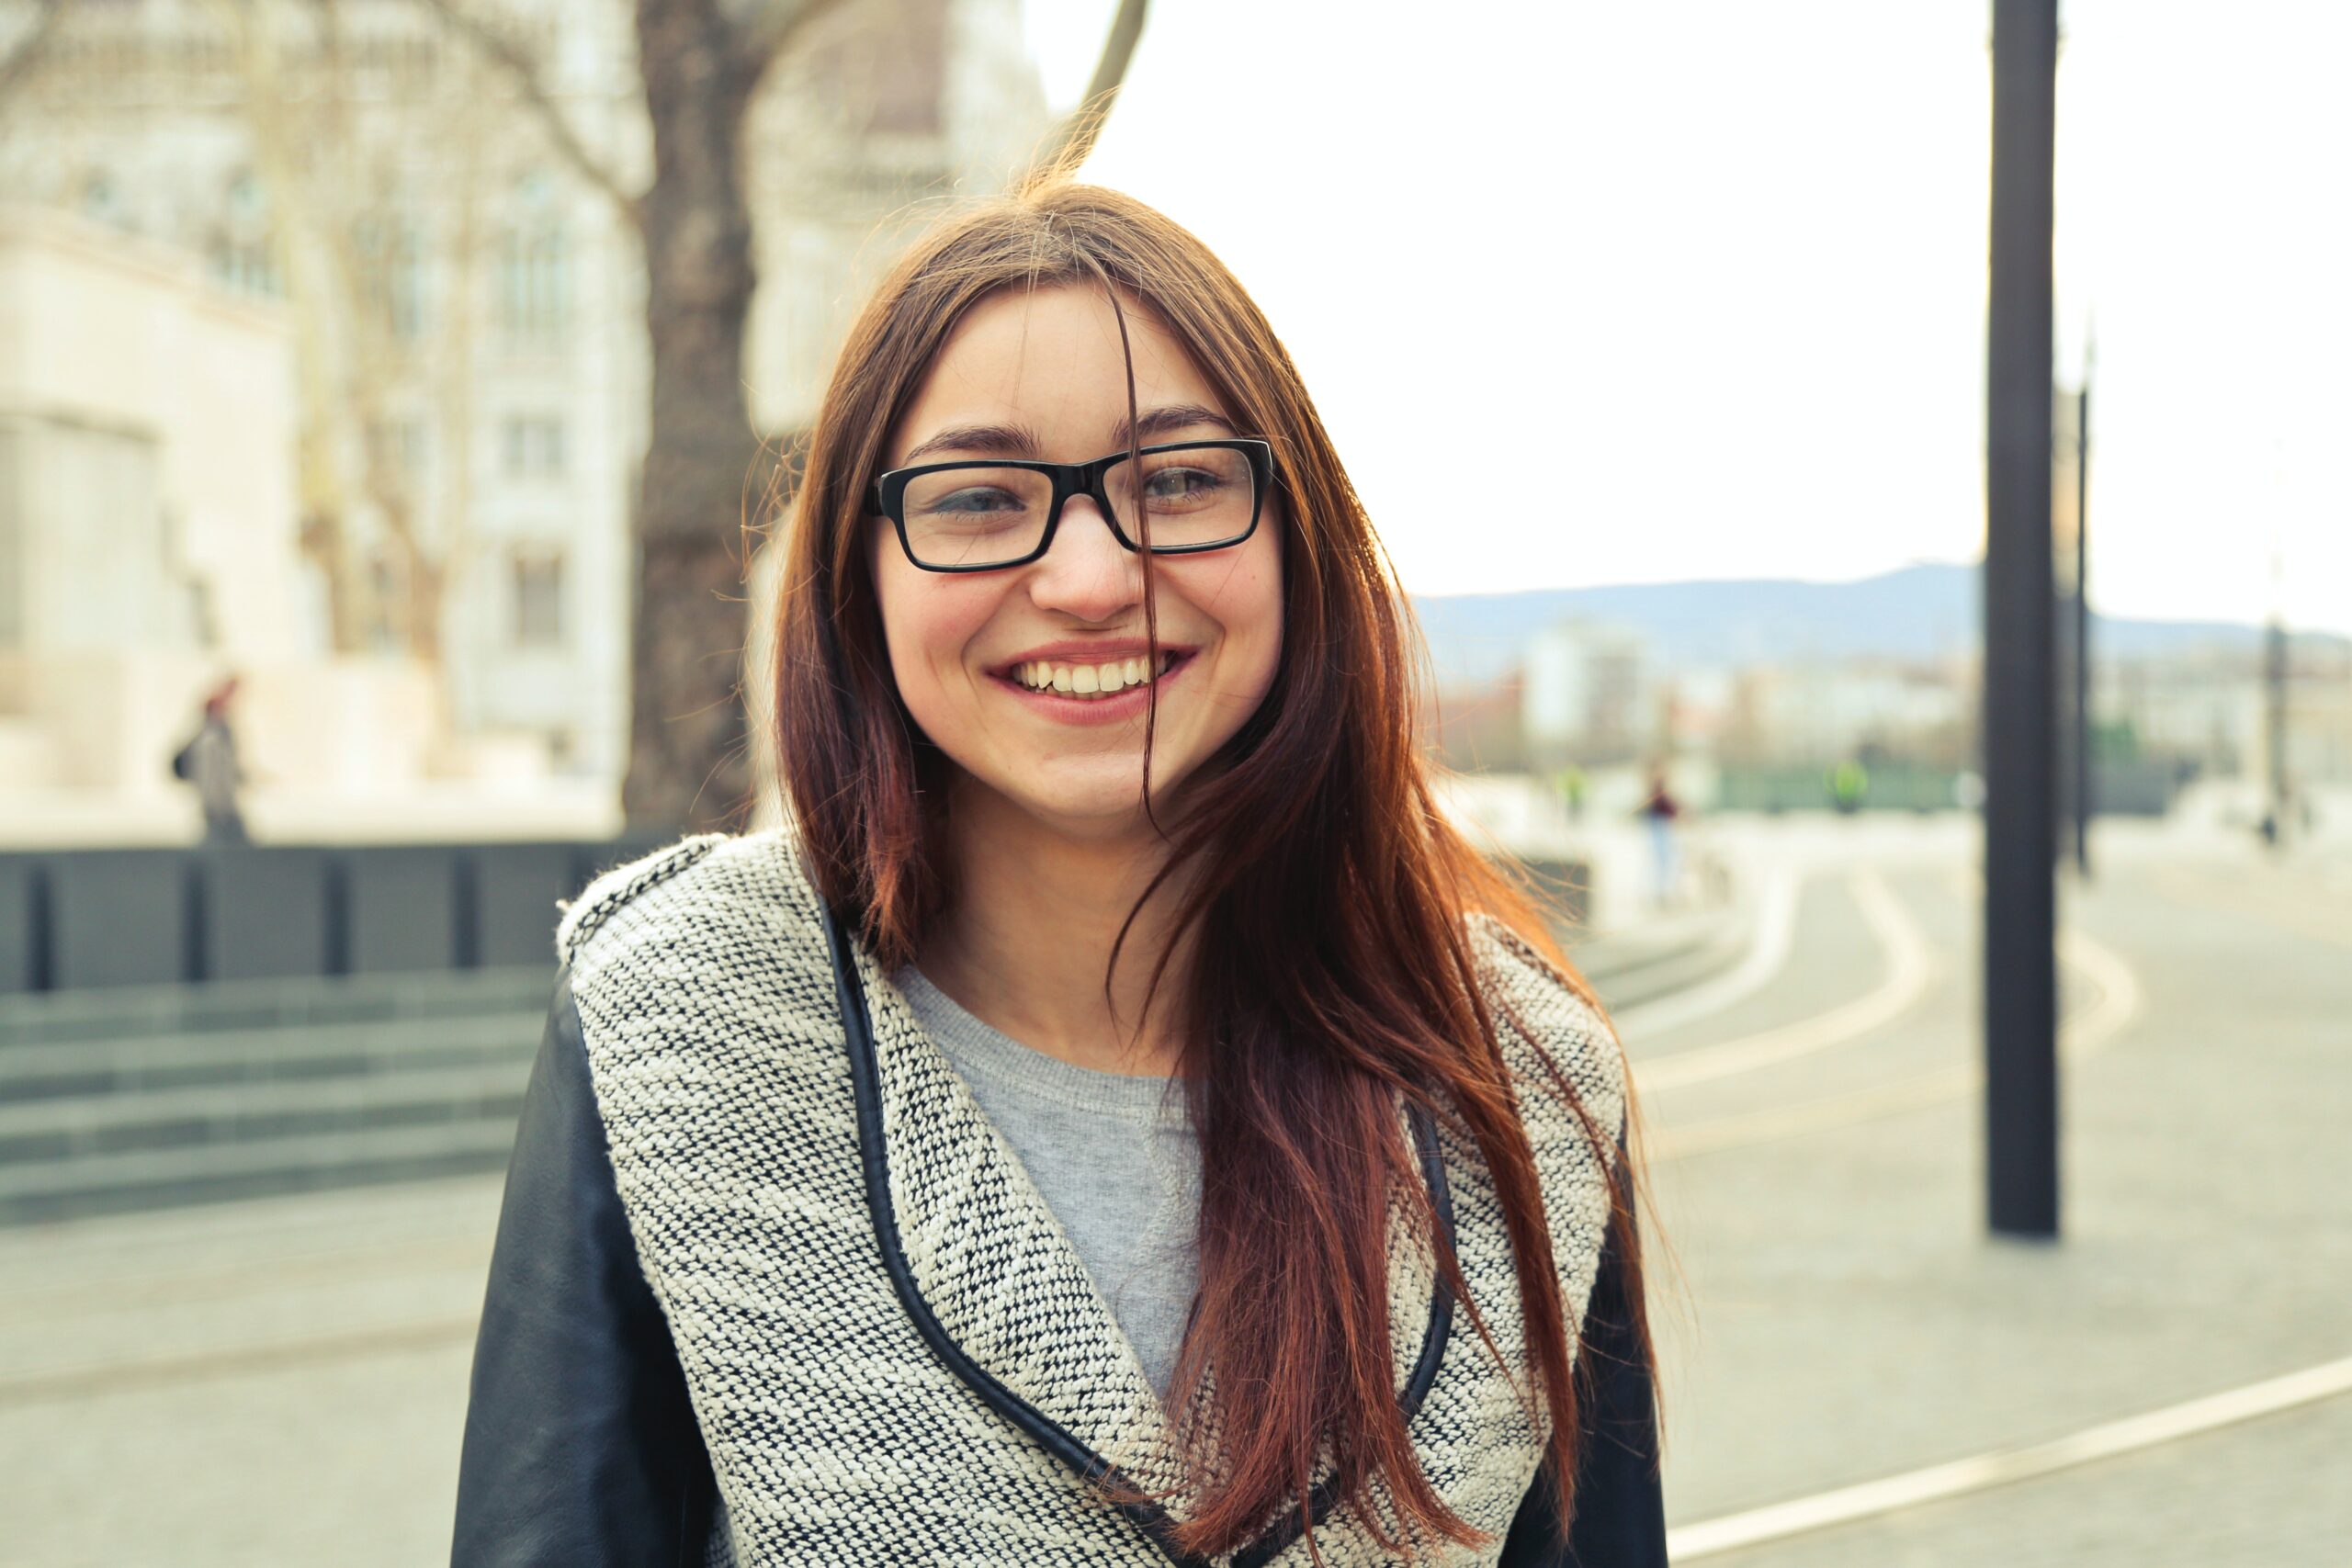 Latina teen smiling with glasses standing outside by the light rail in Denver